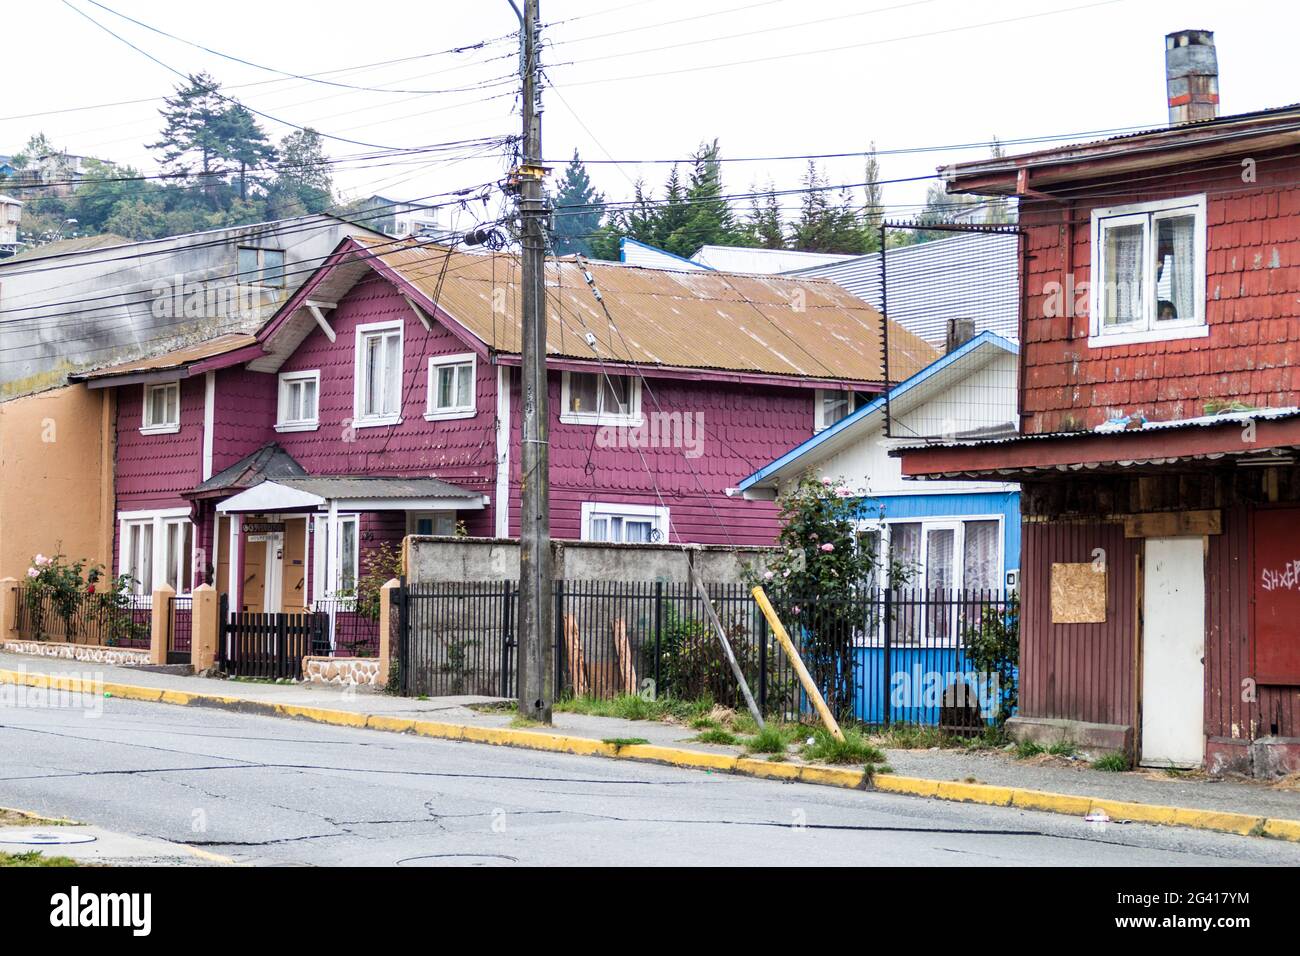 PUERTO MONTT, CHILE - MARCH 1, 2015: Colorful houses in Puerto Montt, Chile  Stock Photo - Alamy